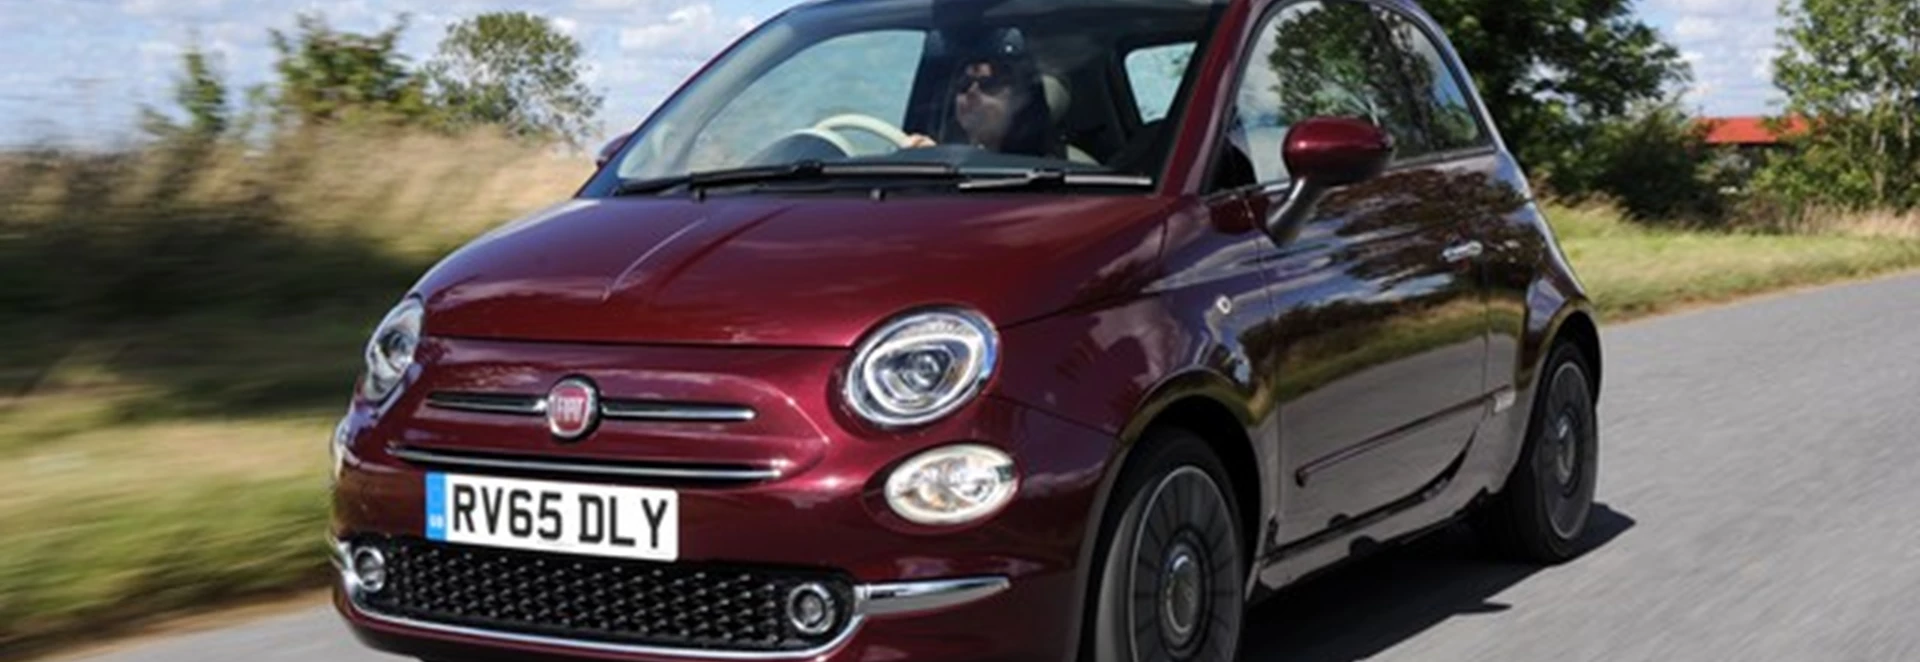 A buyer’s guide to the Fiat 500 